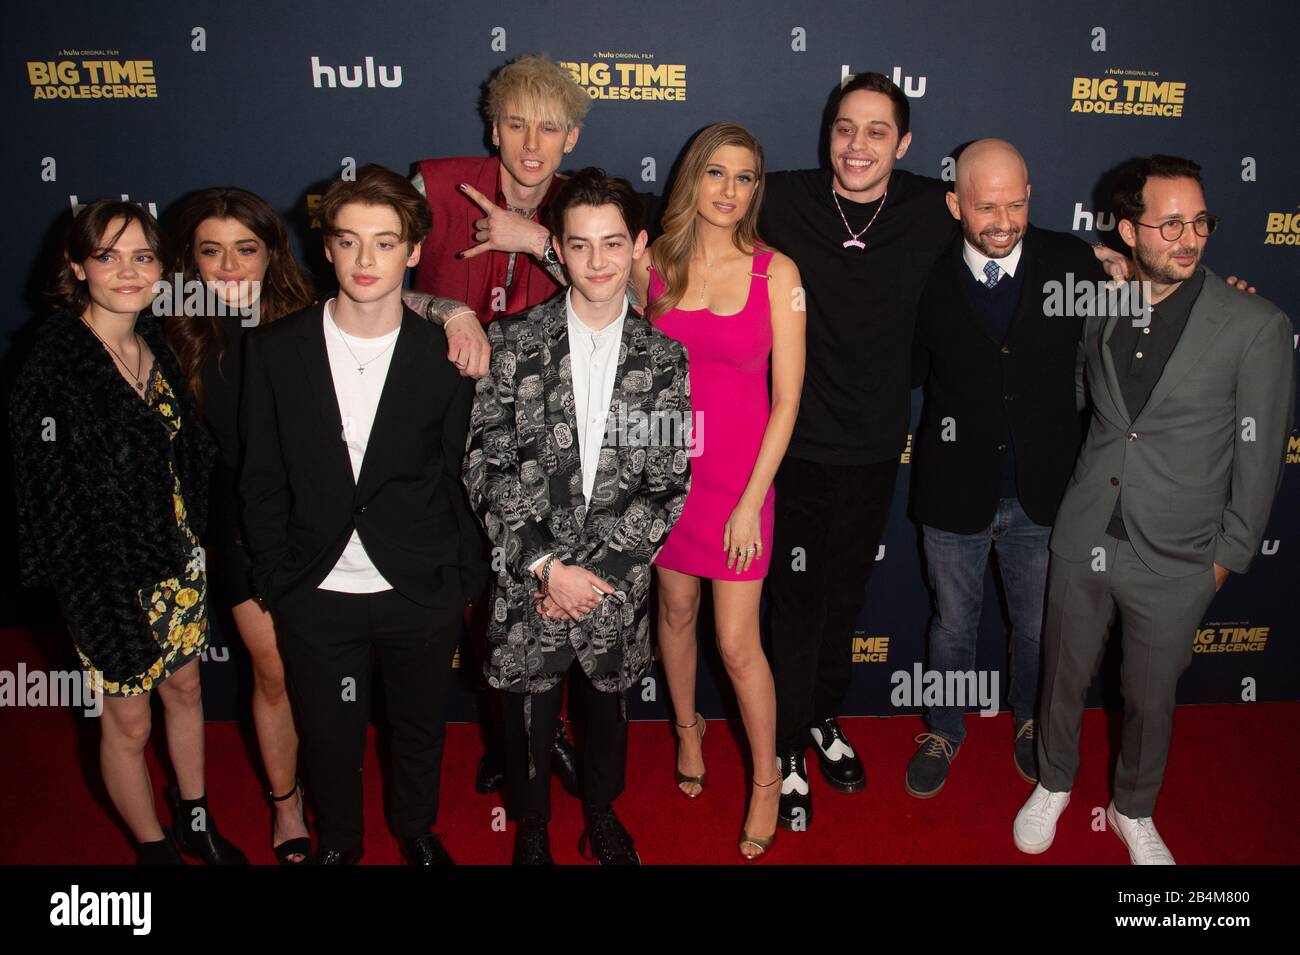 NEW YORK, NY - MARCH 05: Oona Laurence, Brielle Barbusca, Thomas Barbusca, Colson Baker AKA Machine Gun Kelly, Griffin Gluck, Emily Arlook, Pete David Stock Photo